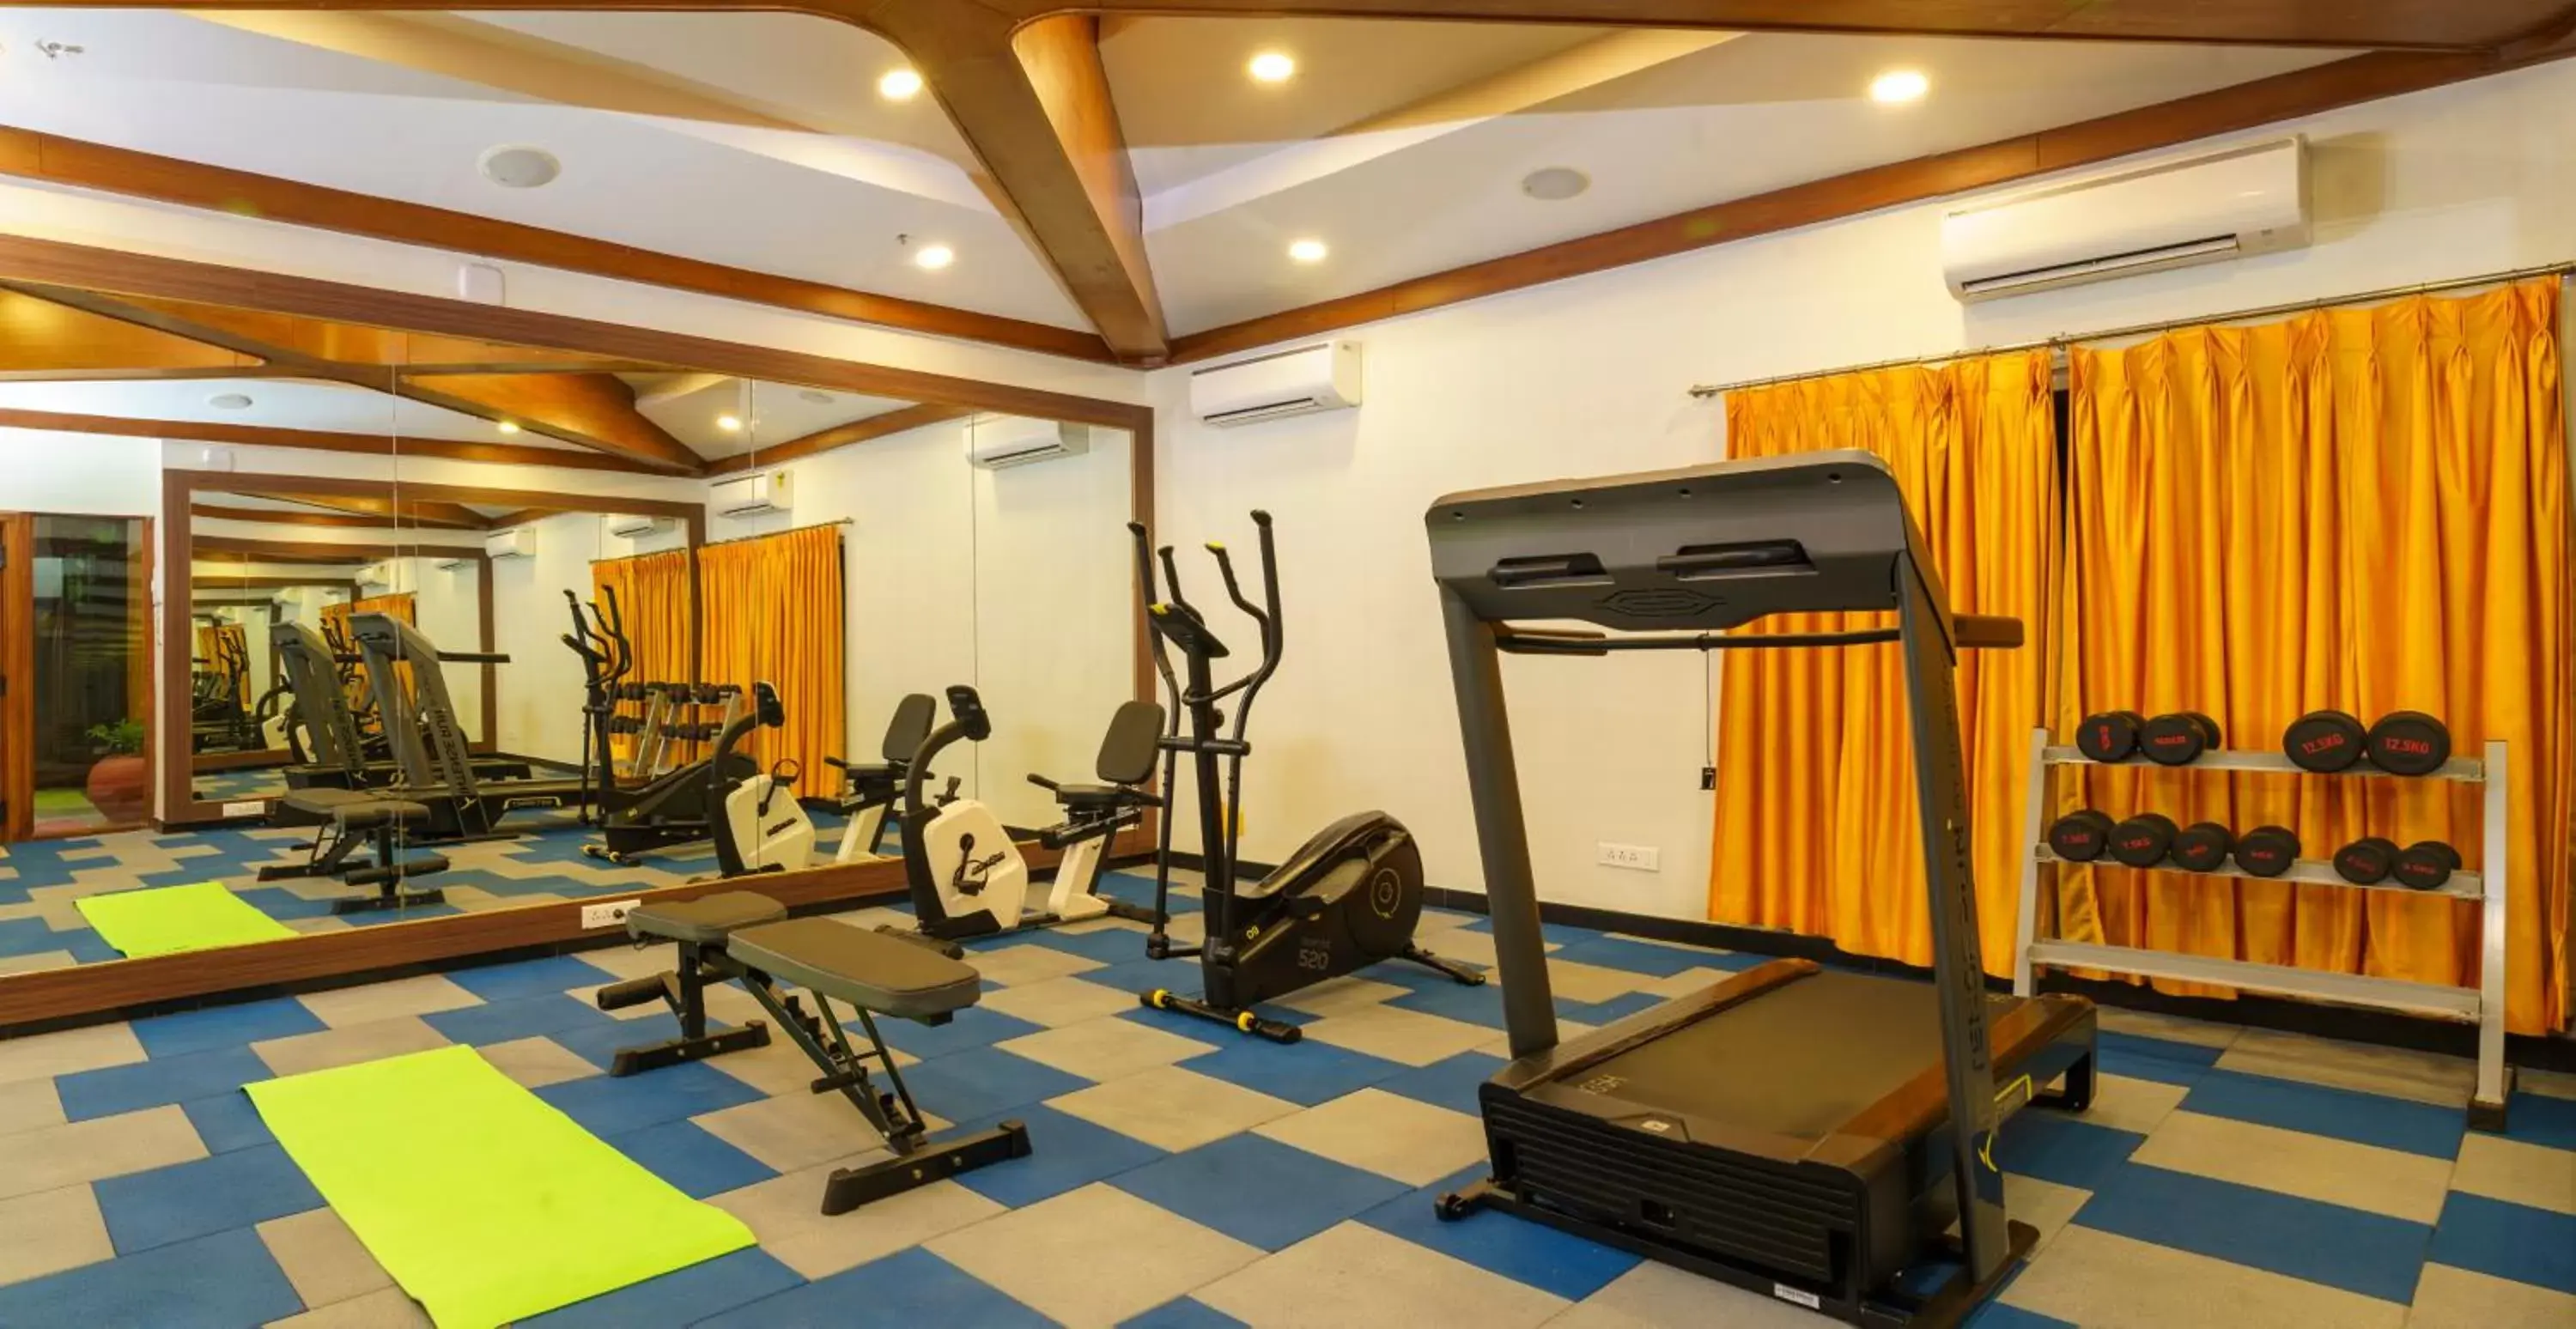 Fitness centre/facilities, Fitness Center/Facilities in Fortune Pandiyan Hotel, Madurai - Member ITC's Hotel Group